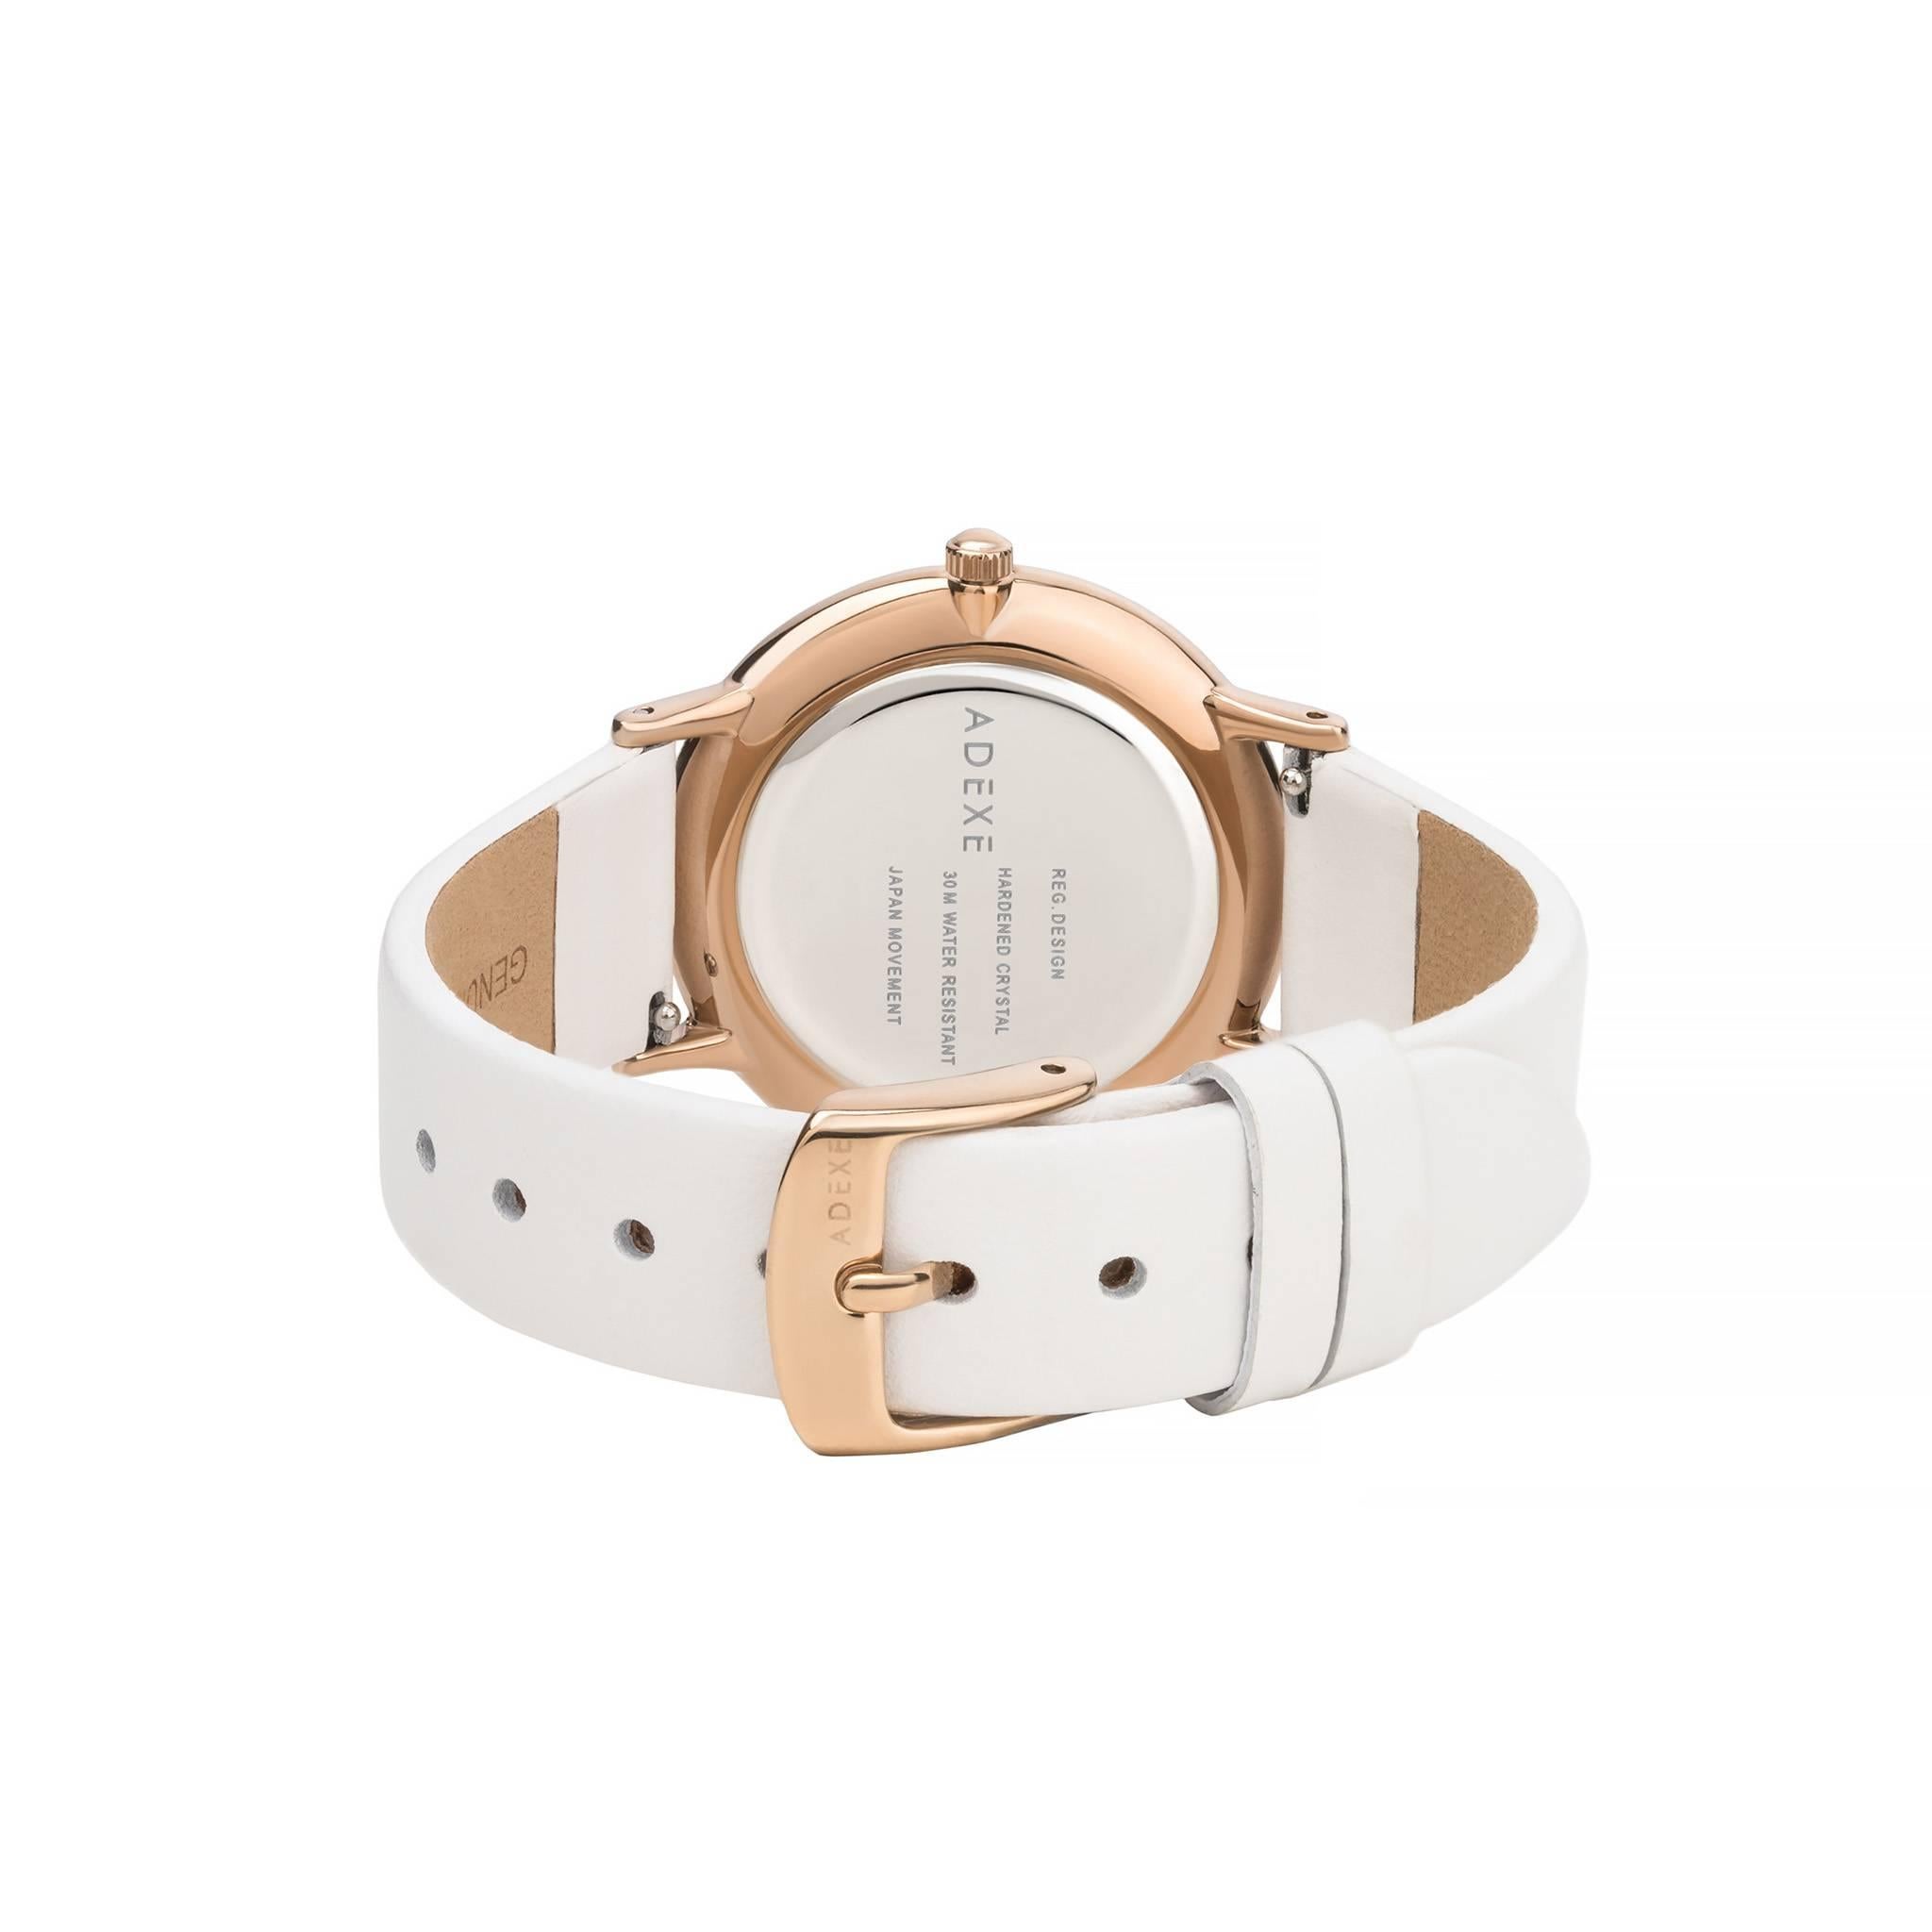 Adexe White and Rose Gold Stainless Steel Genuine Italian Leather Quartz Watch In New Condition For Sale In London, GB